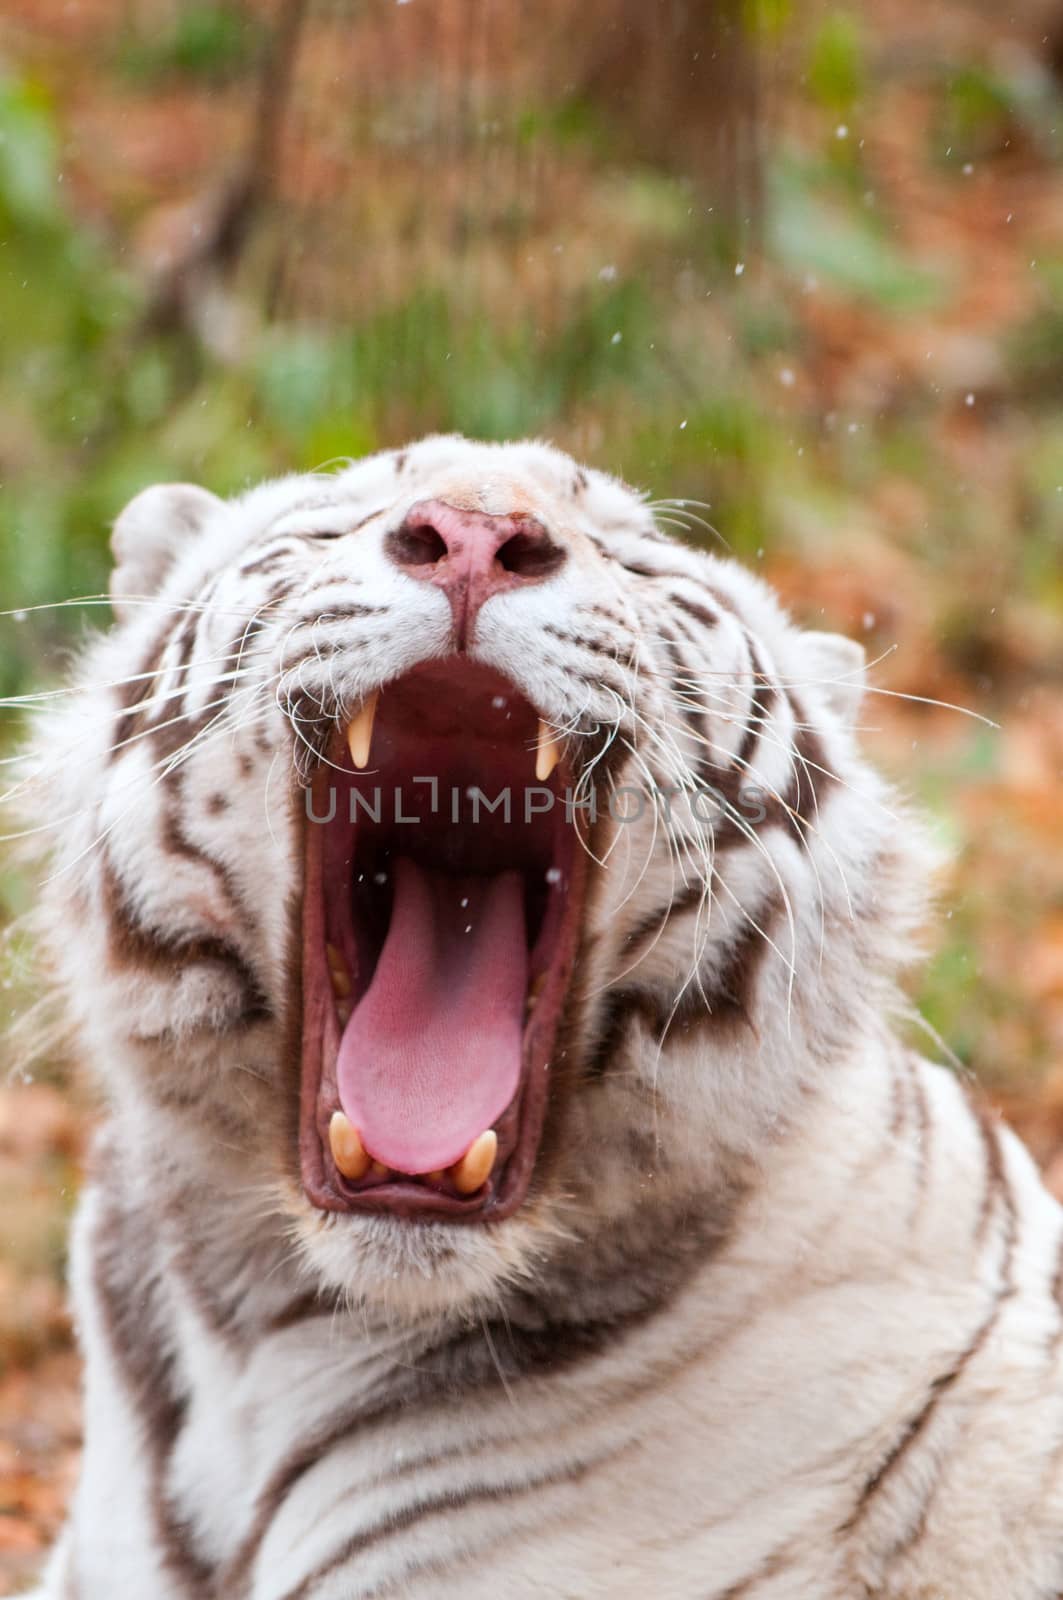 White Bengal Tiger in a Zoo